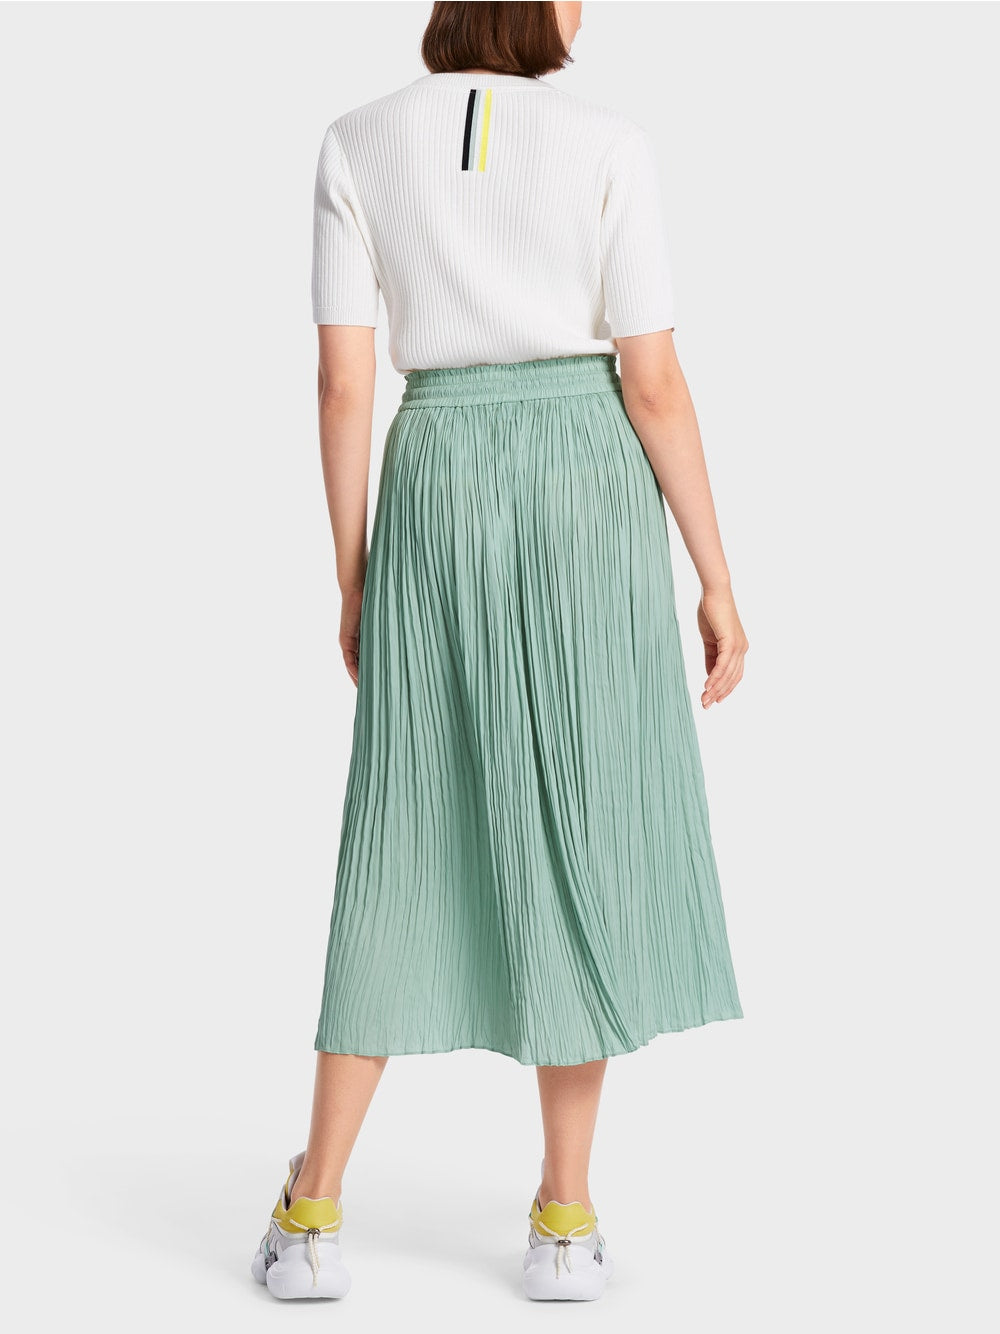 soft sage skirt with pleats